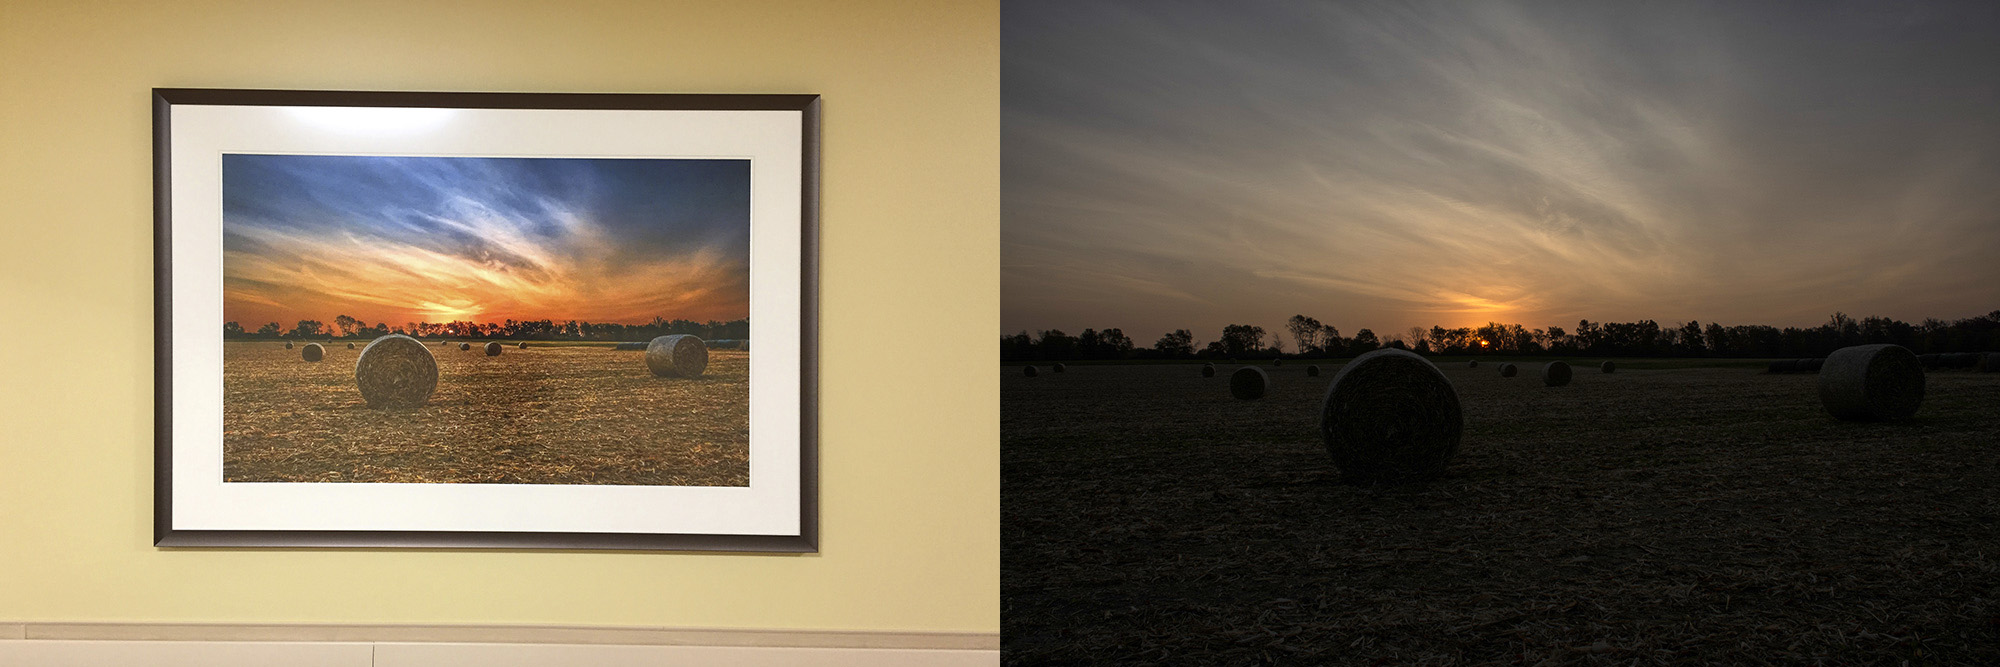 Sunrise in Miami County, before and after photograph by Dan Cleary in Dayton Ohio